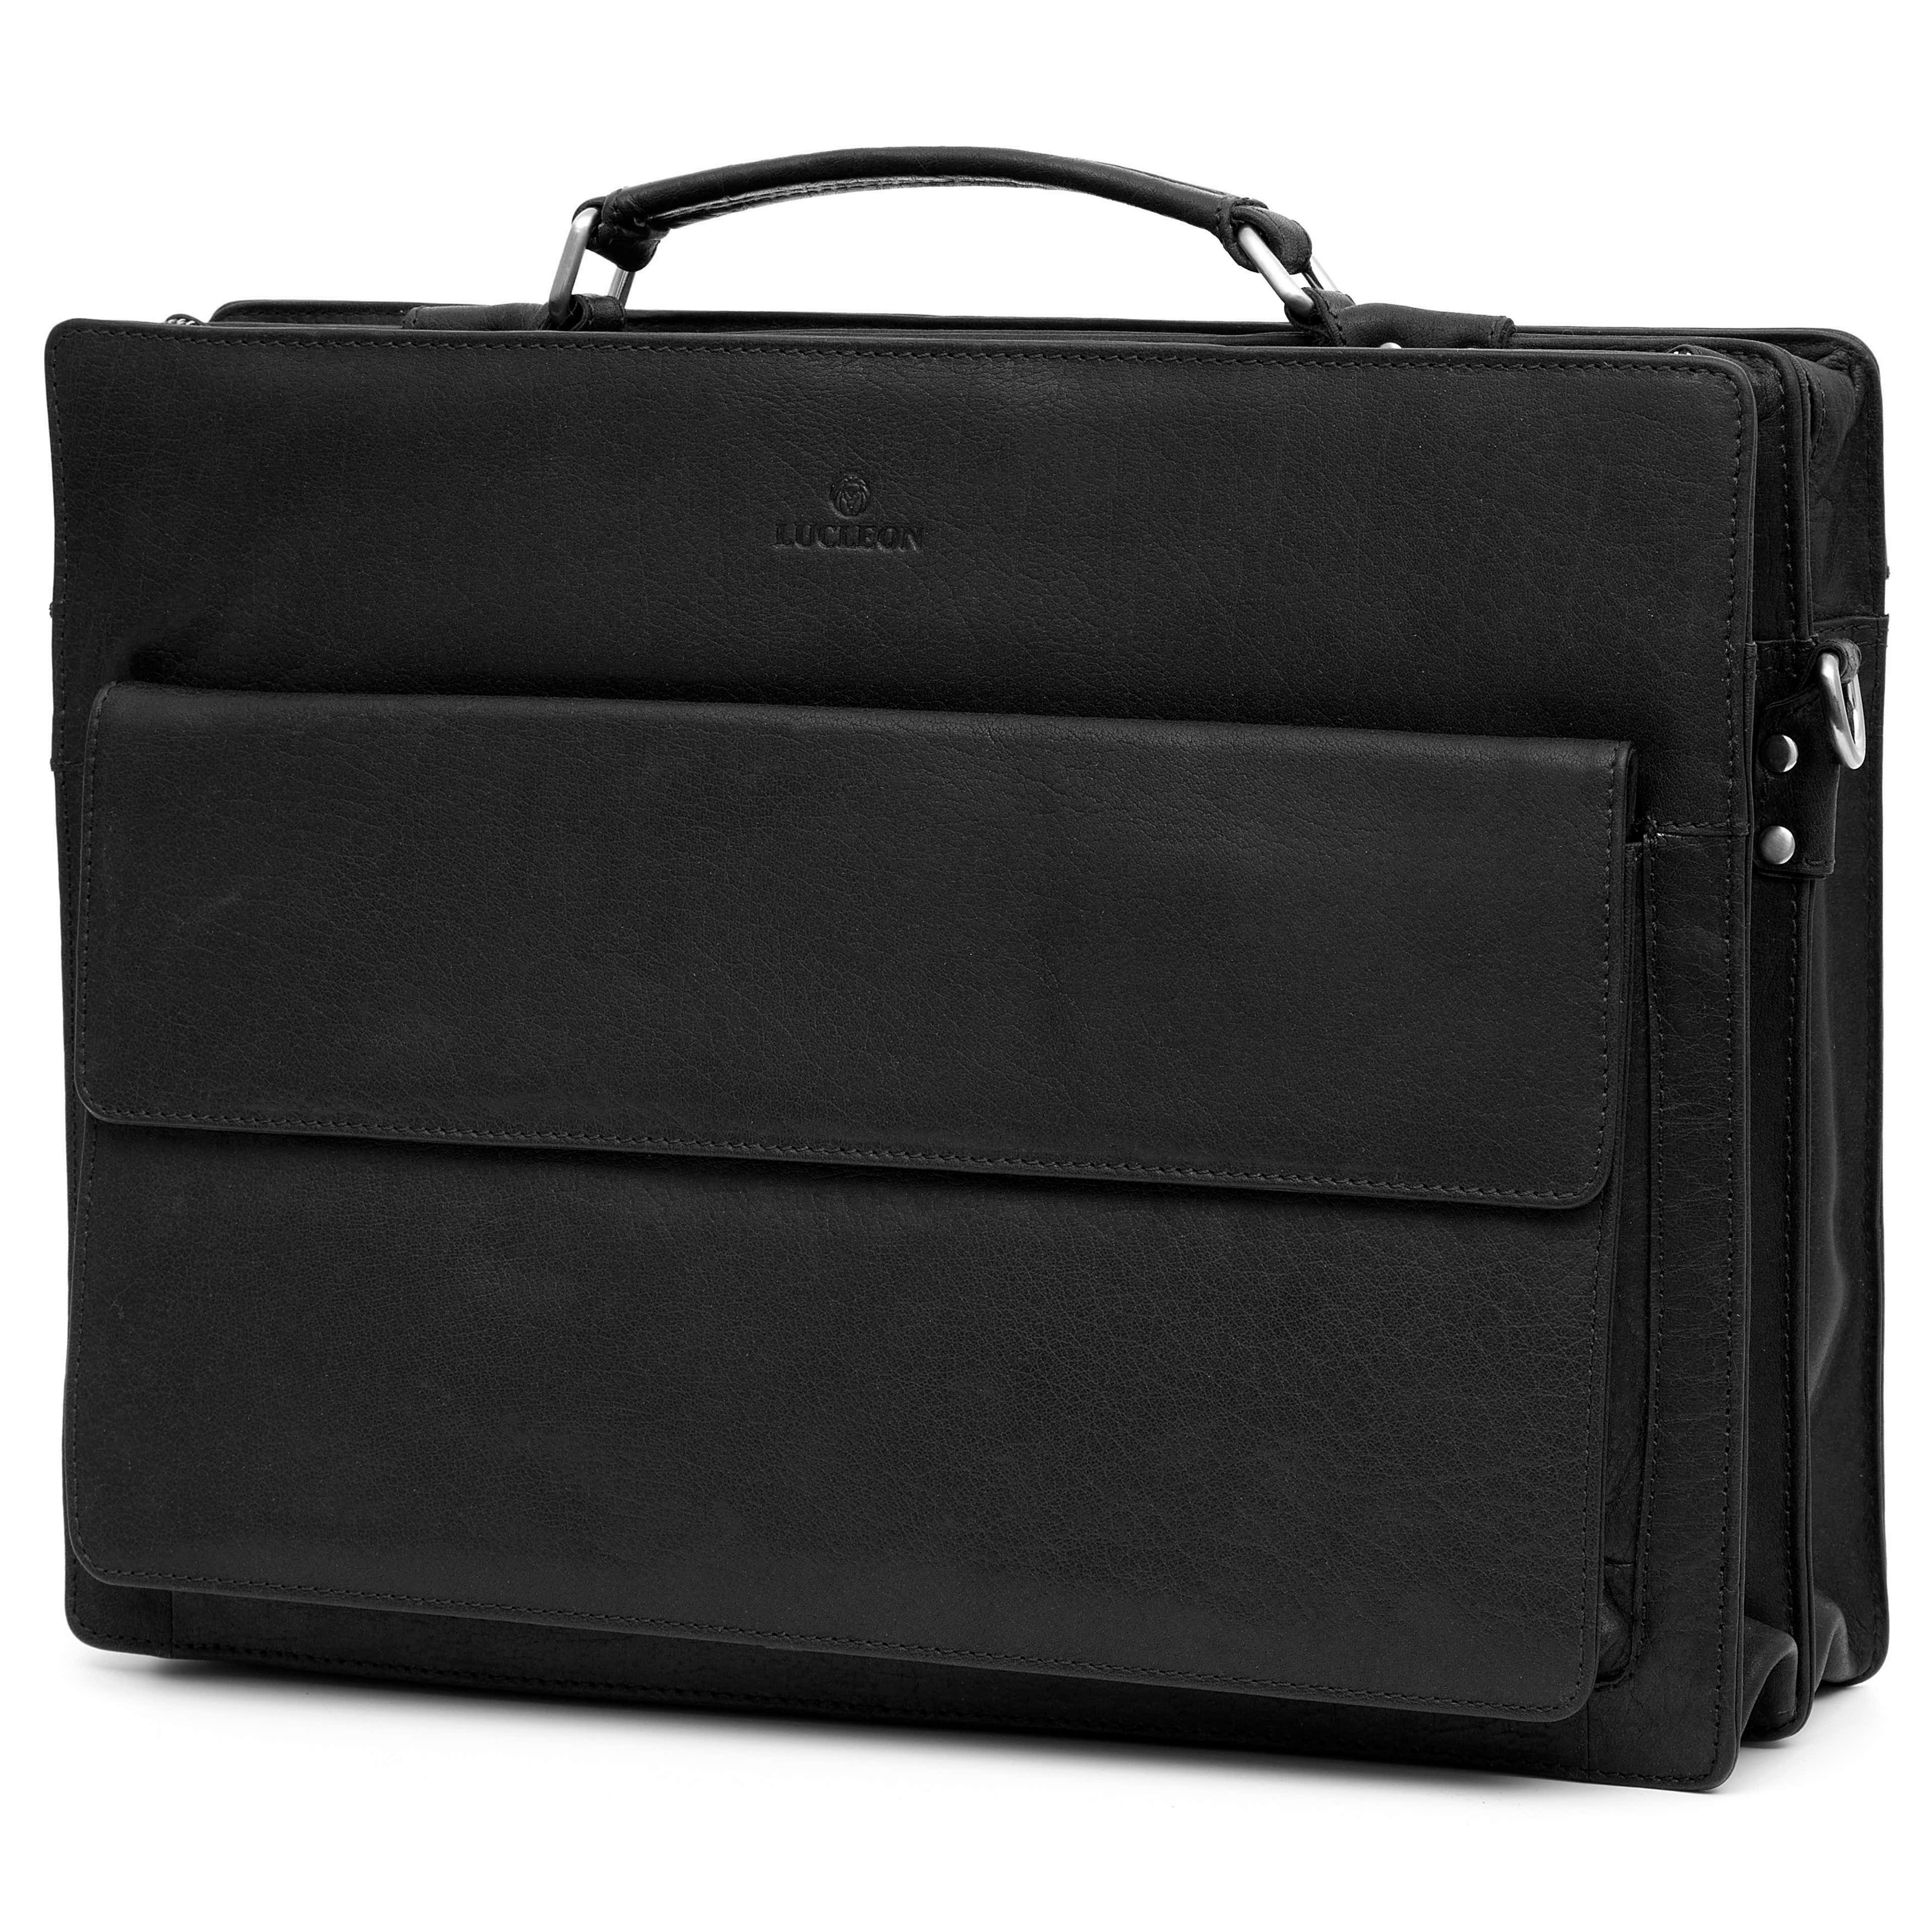 Montreal Black Compact Leather Briefcase